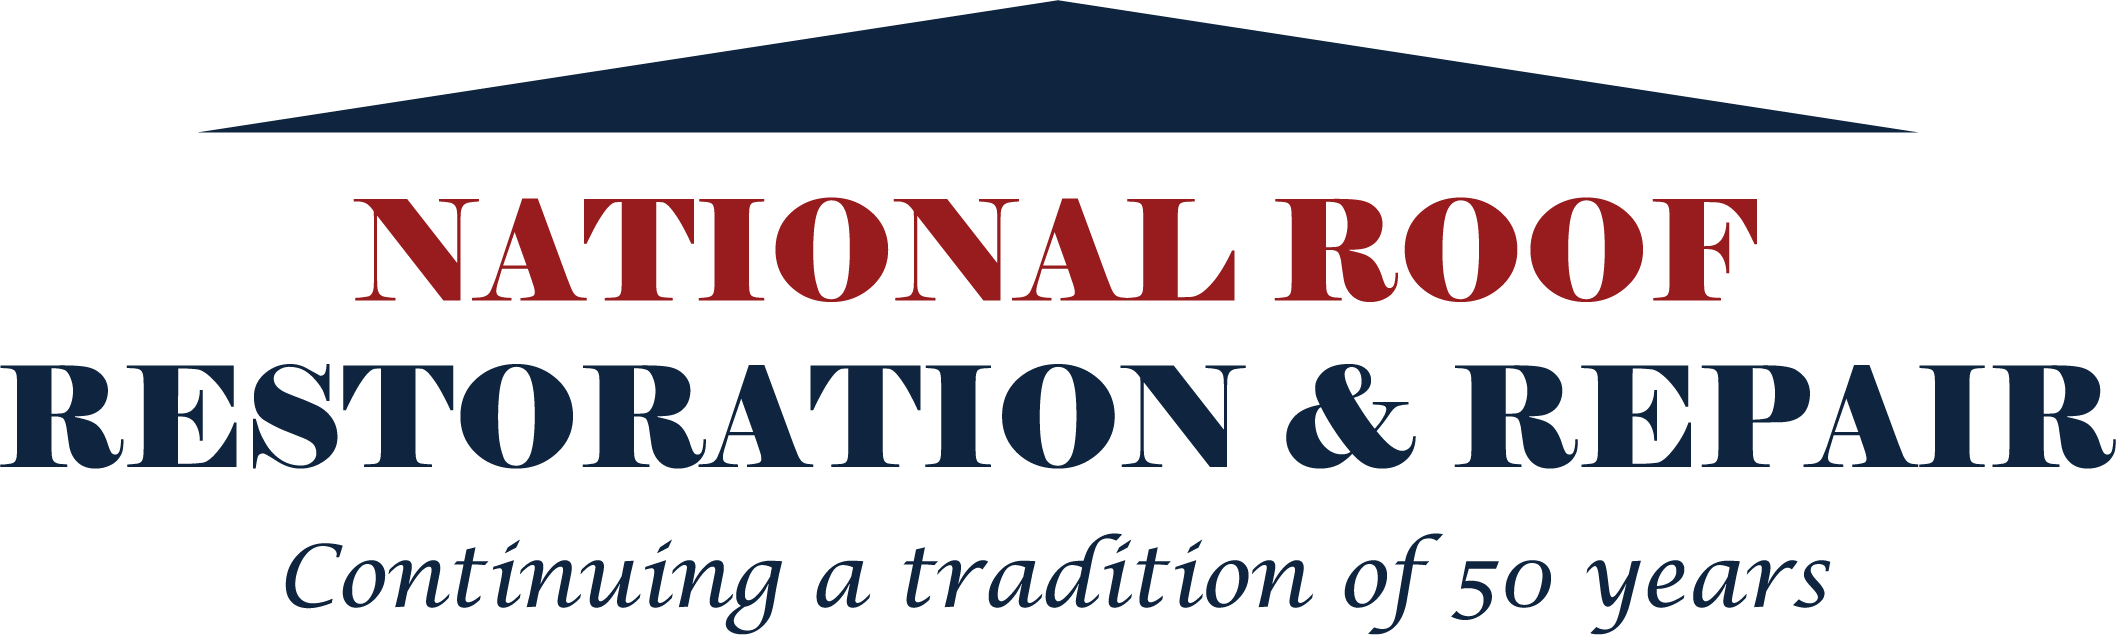 National Roof Coaters Logo